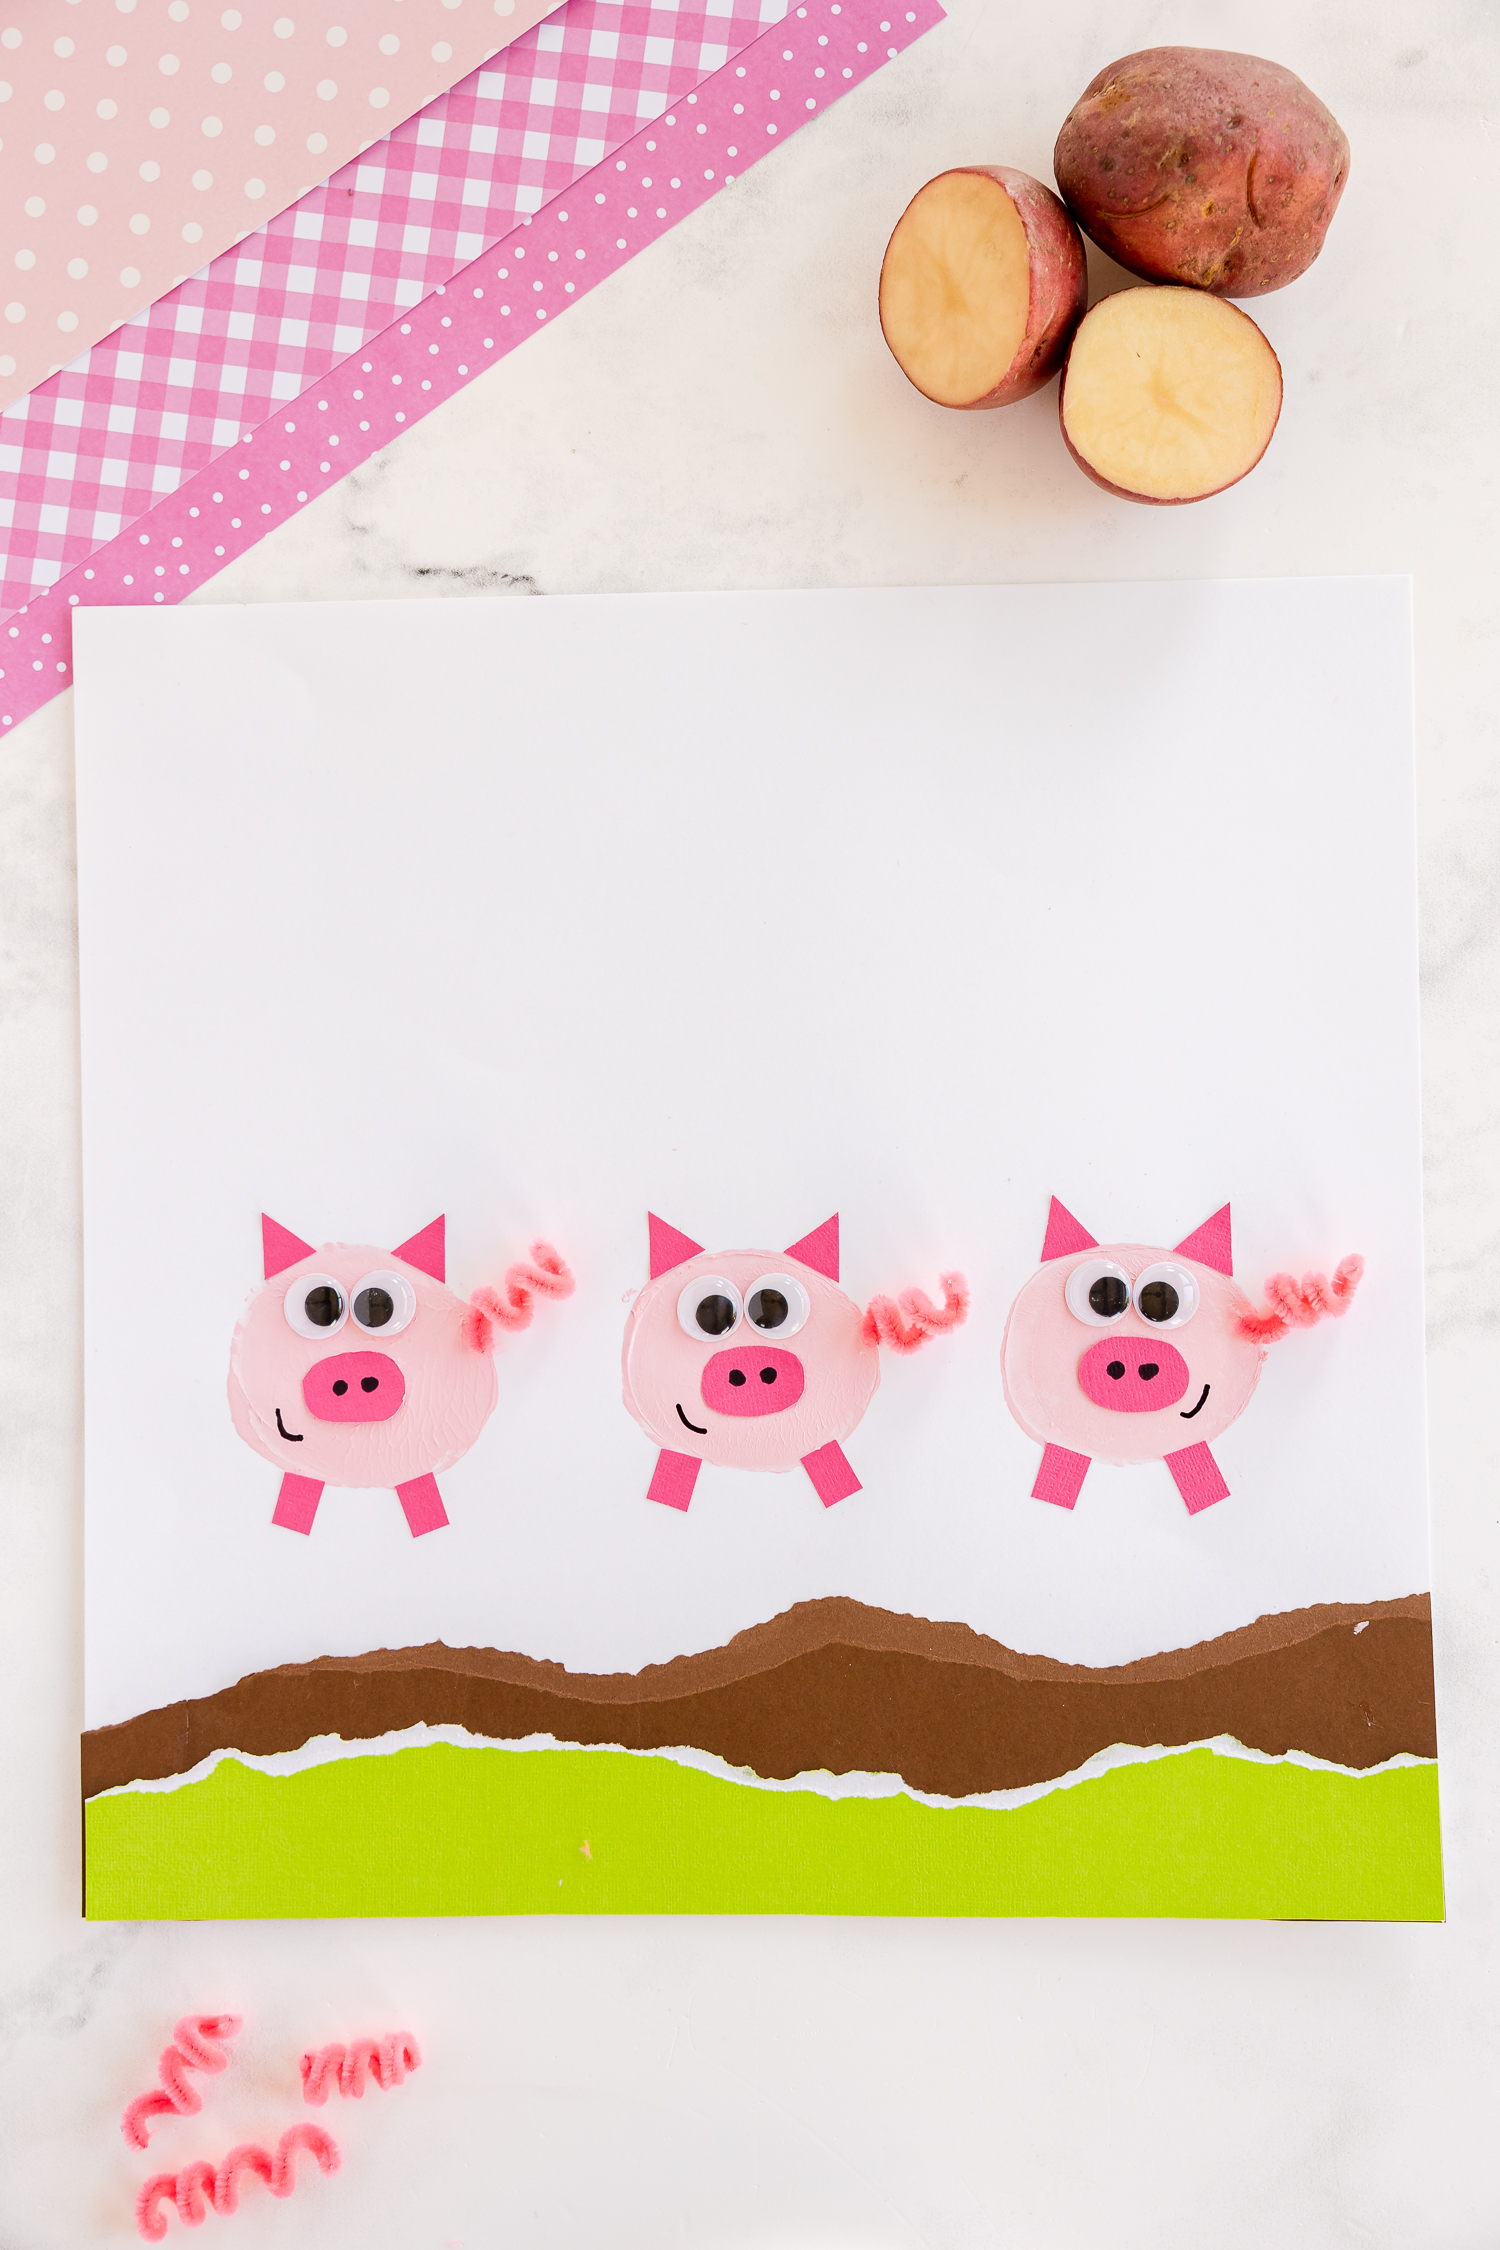 This Three Little Pigs Craft is an adorable way to bring the classic fairytale story to life! Potato stamping is a fun start to this little pigs activity!